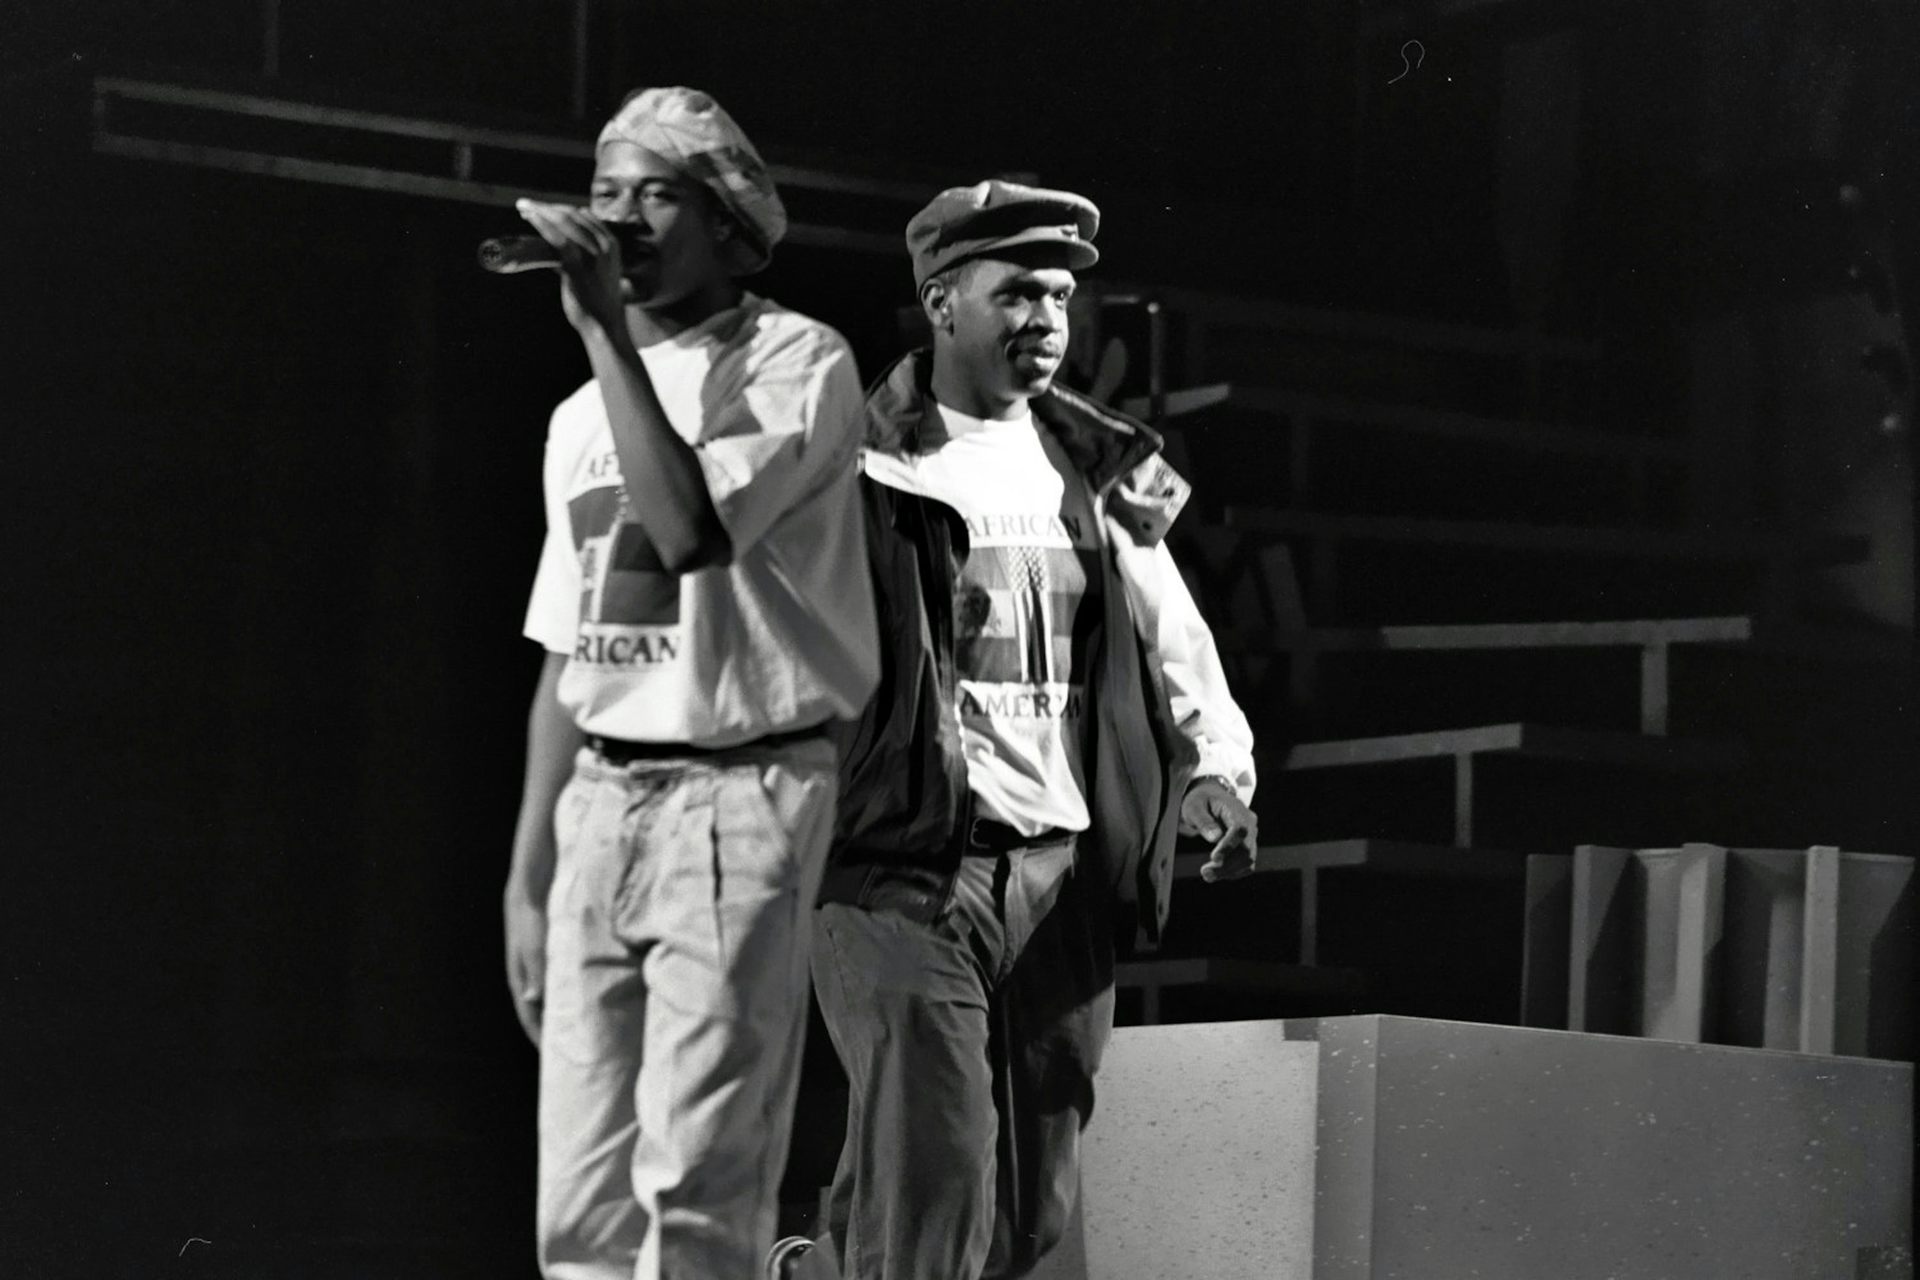 Two young Black men wearing hats stand back to back on a stage.